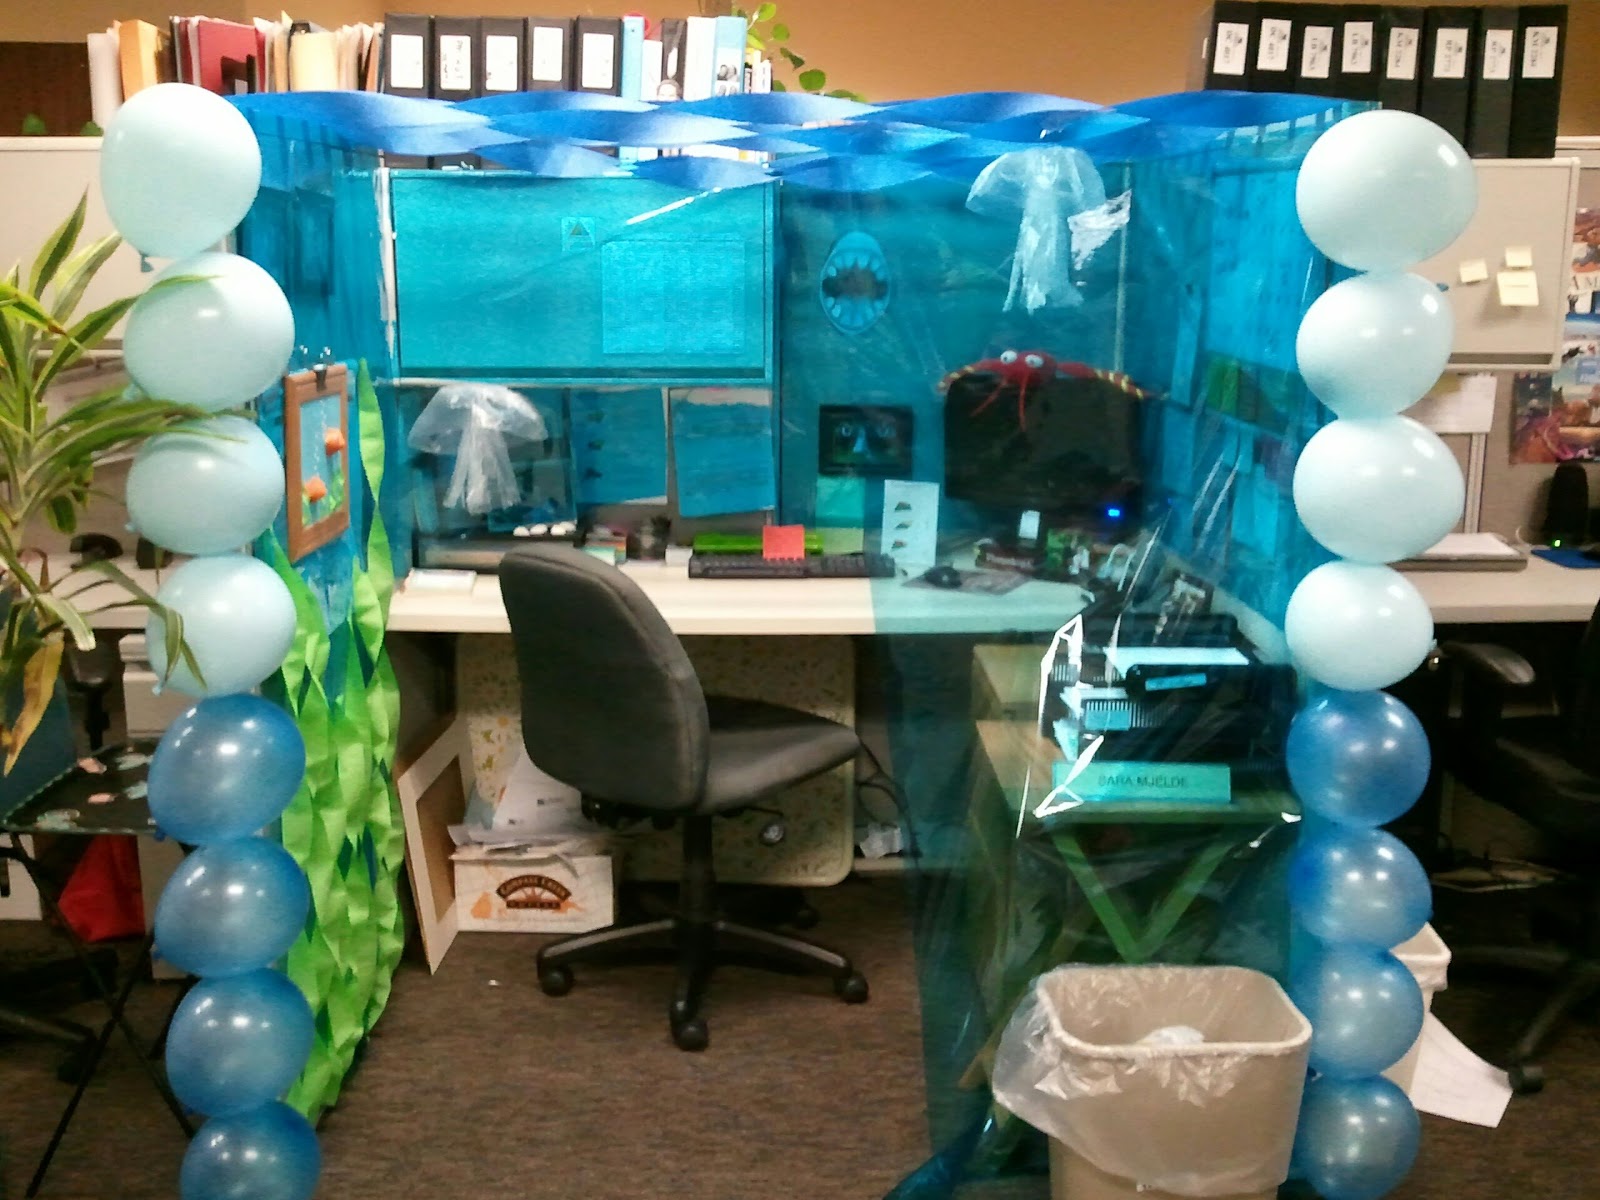 blue-balloons-and-ribbon-paired-with-fish-picture-frame-jellyfish-ornament-and-shark-wallpaper-for-sea-theme-office-room.